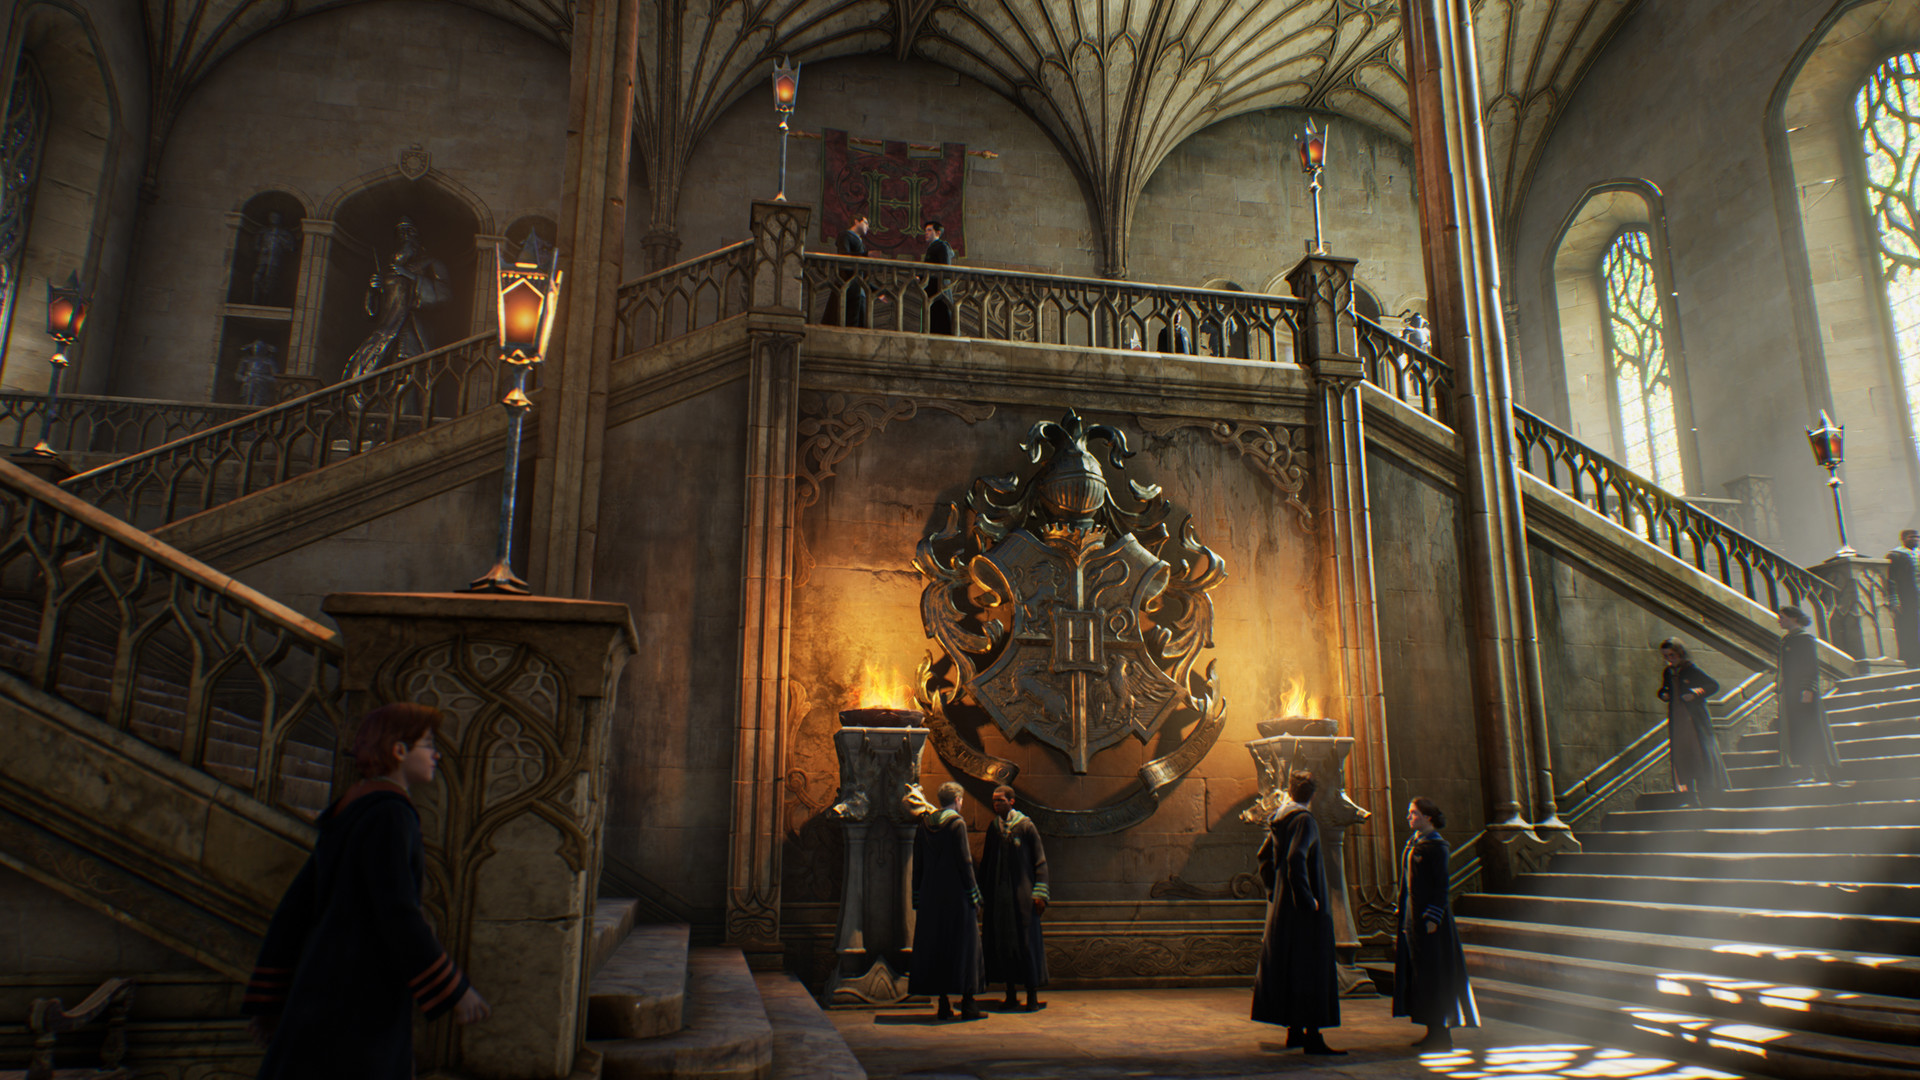 Hogwarts Legacy is already a top-selling Steam game weeks before